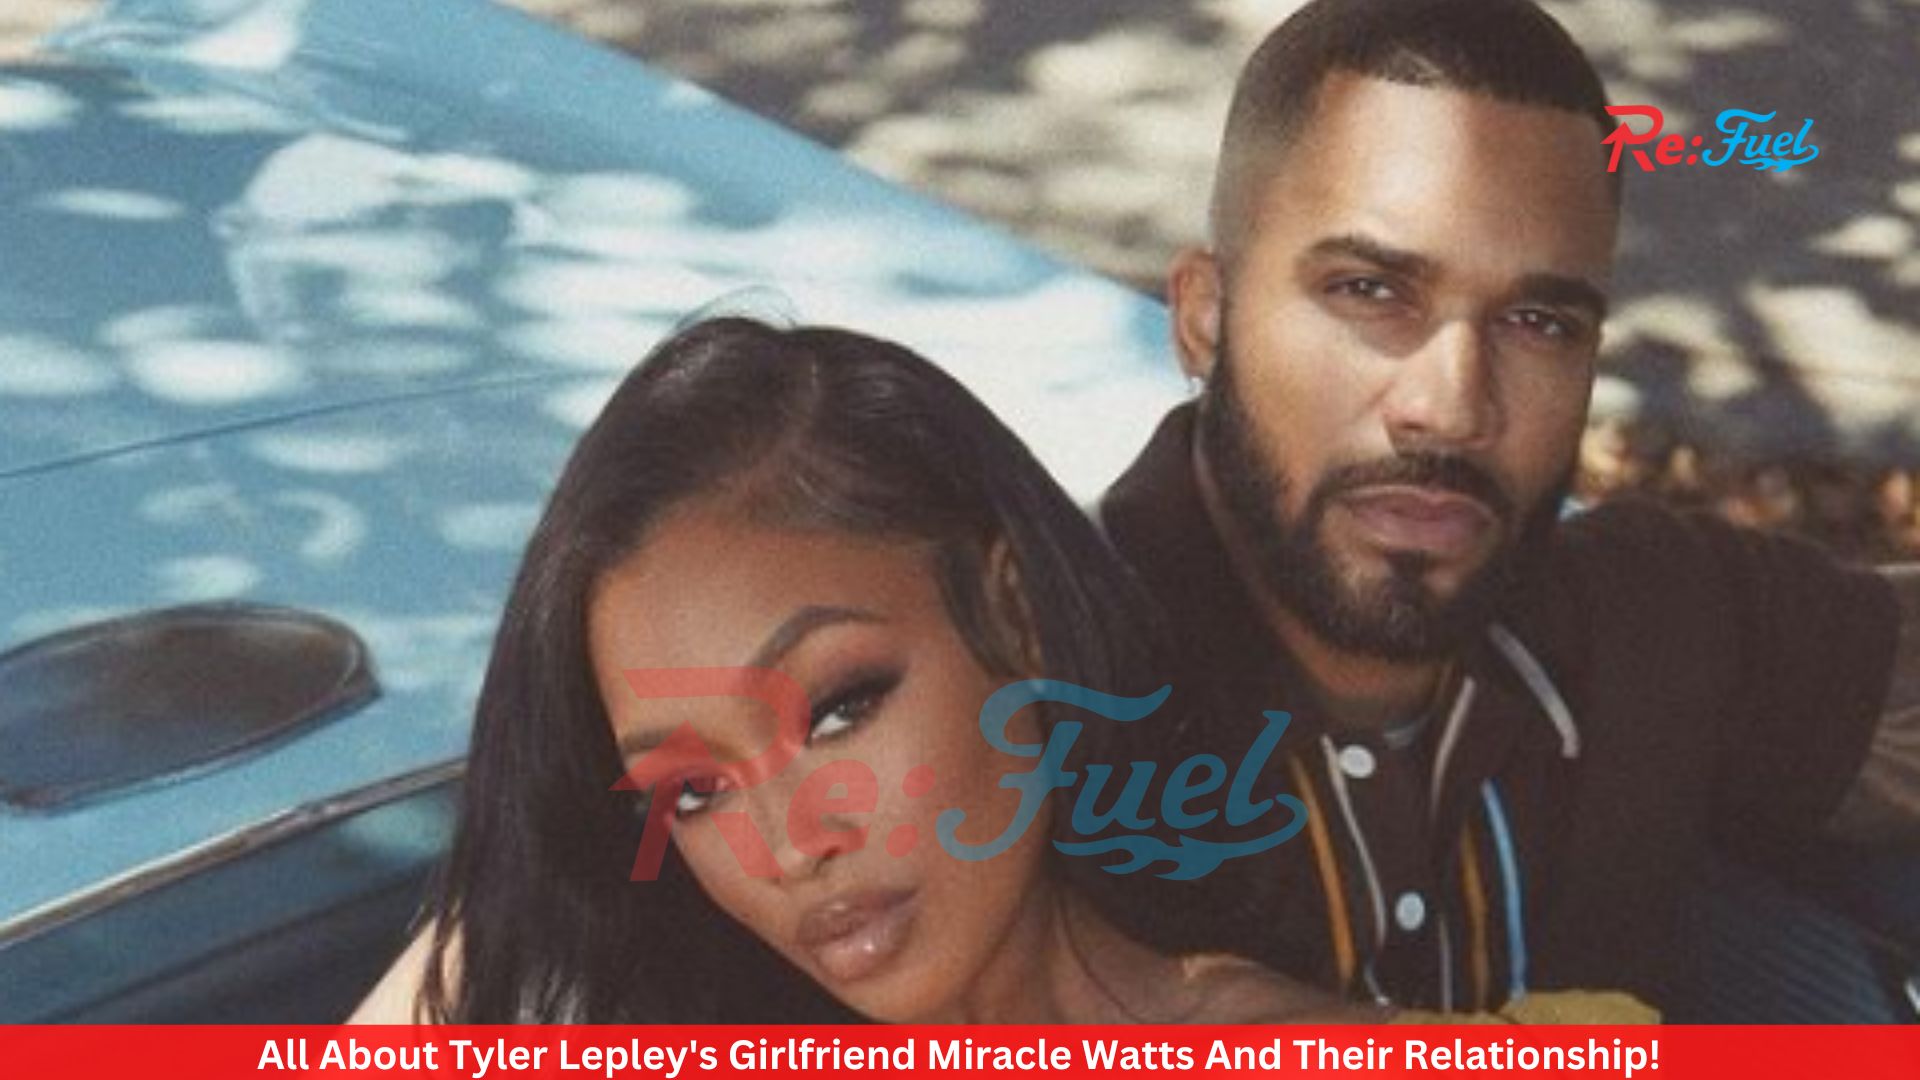 All About Tyler Lepley's Girlfriend Miracle Watts And Their Relationship!